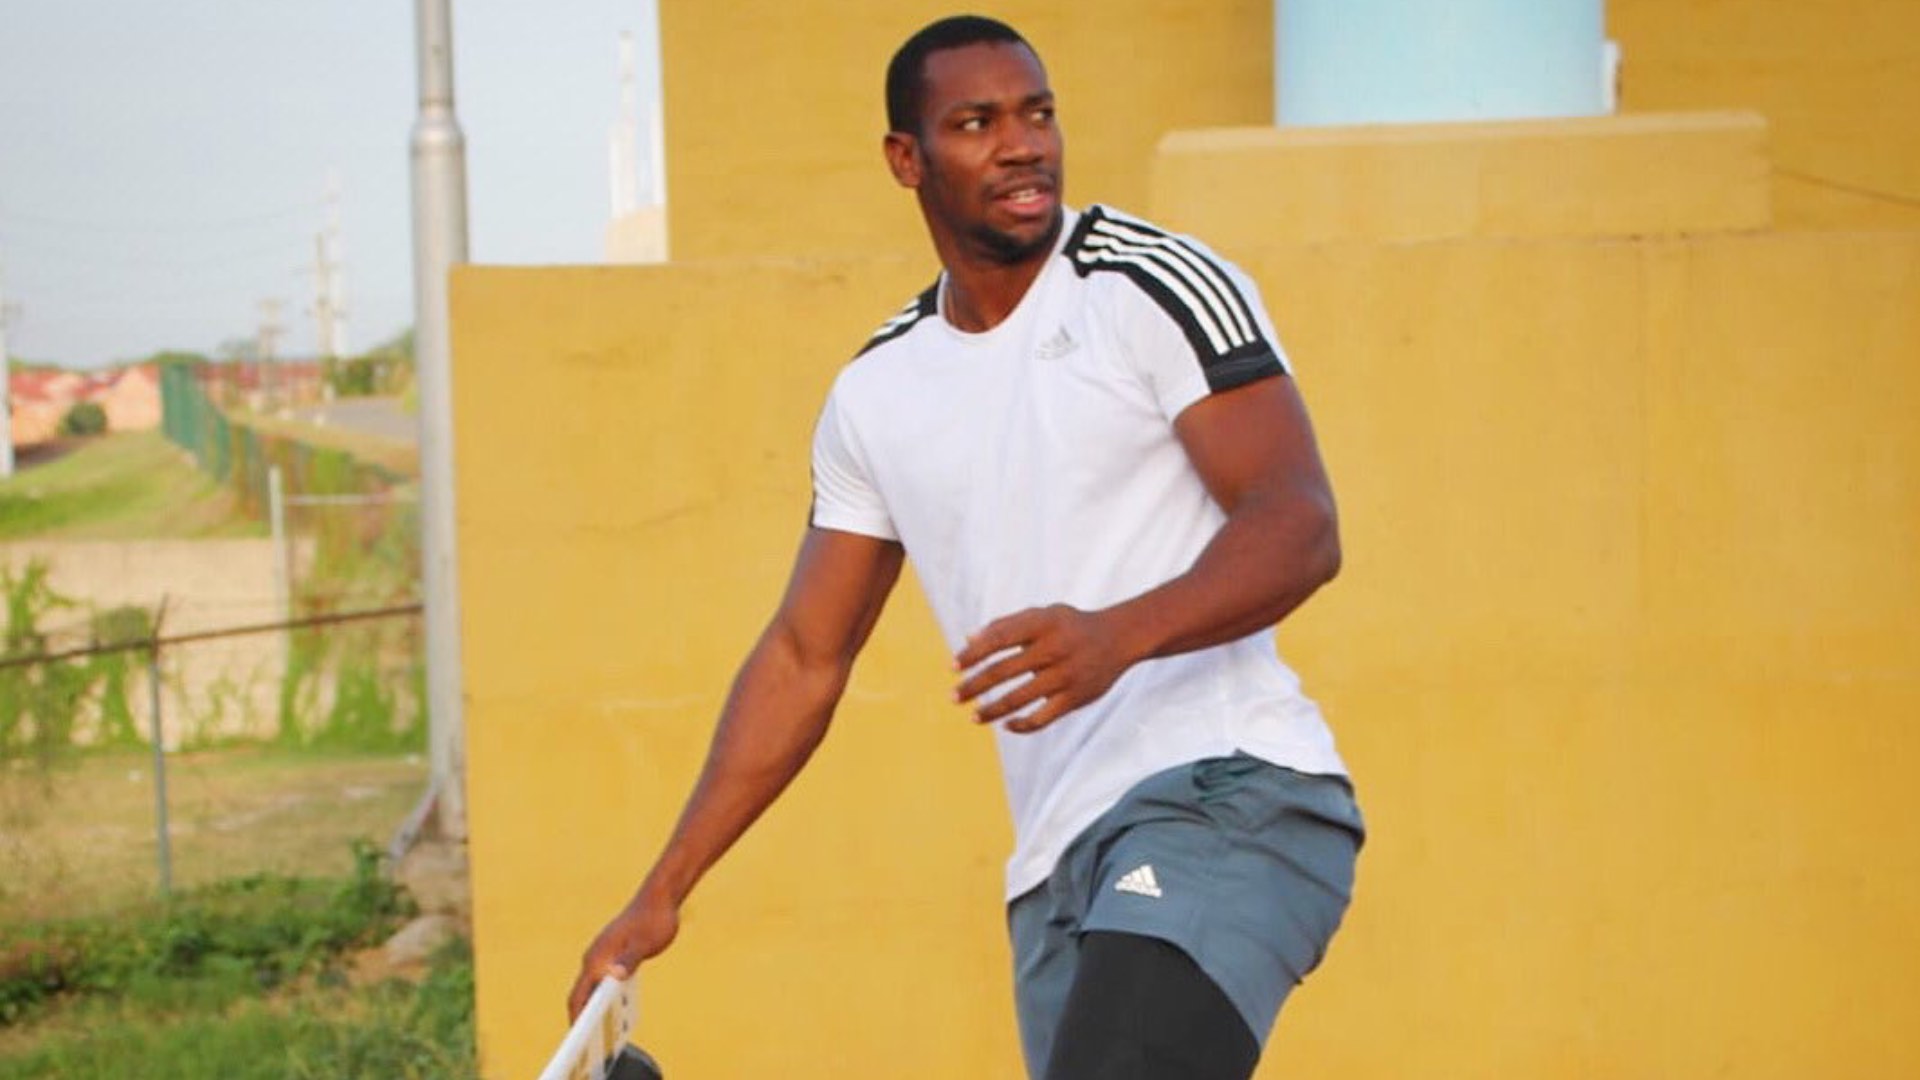 Yohan Blake during a practice session (Image Credits - Twitter)